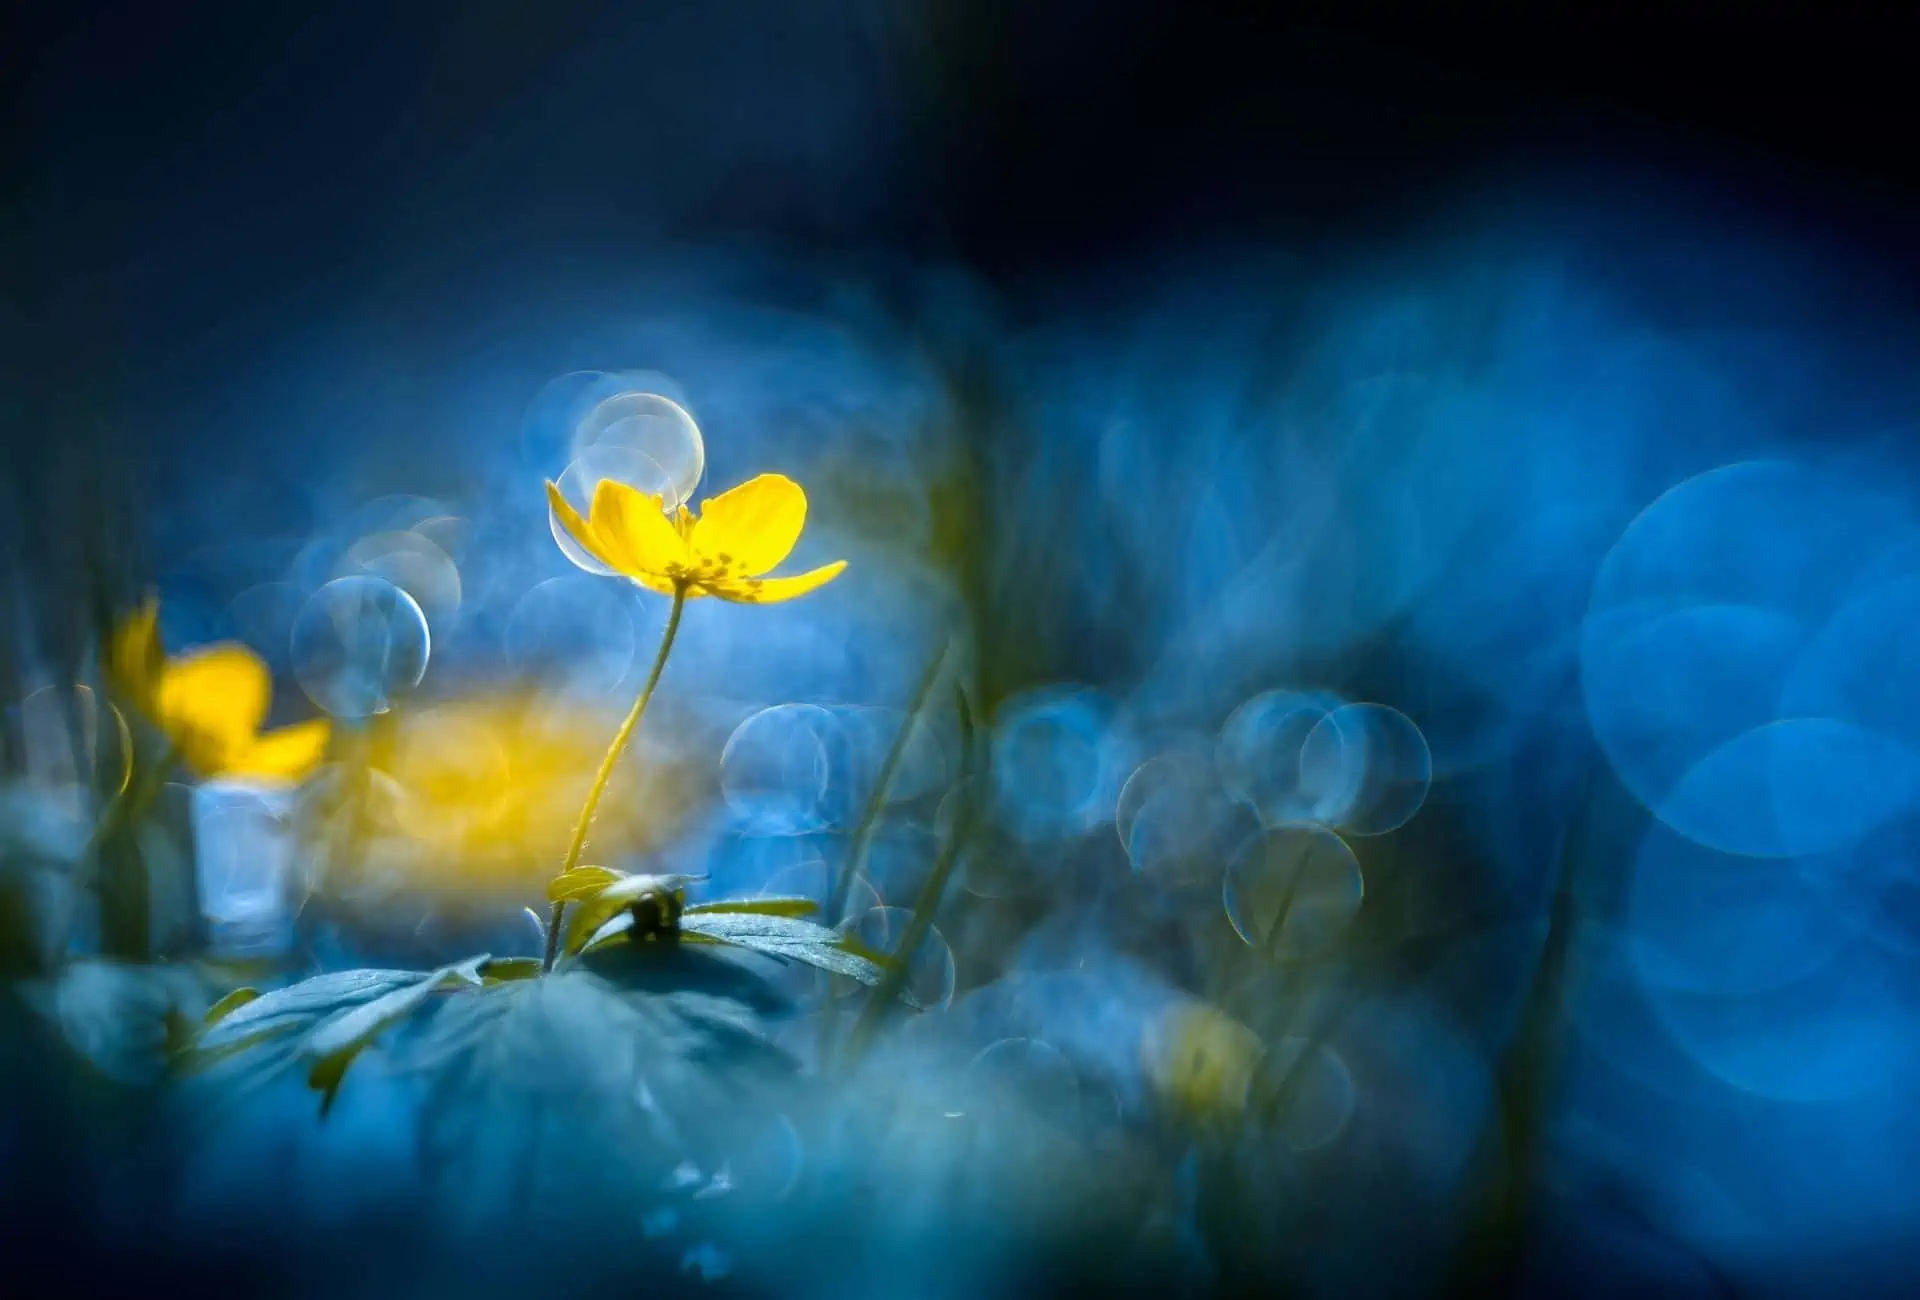 Yellow flower in front of blue background.